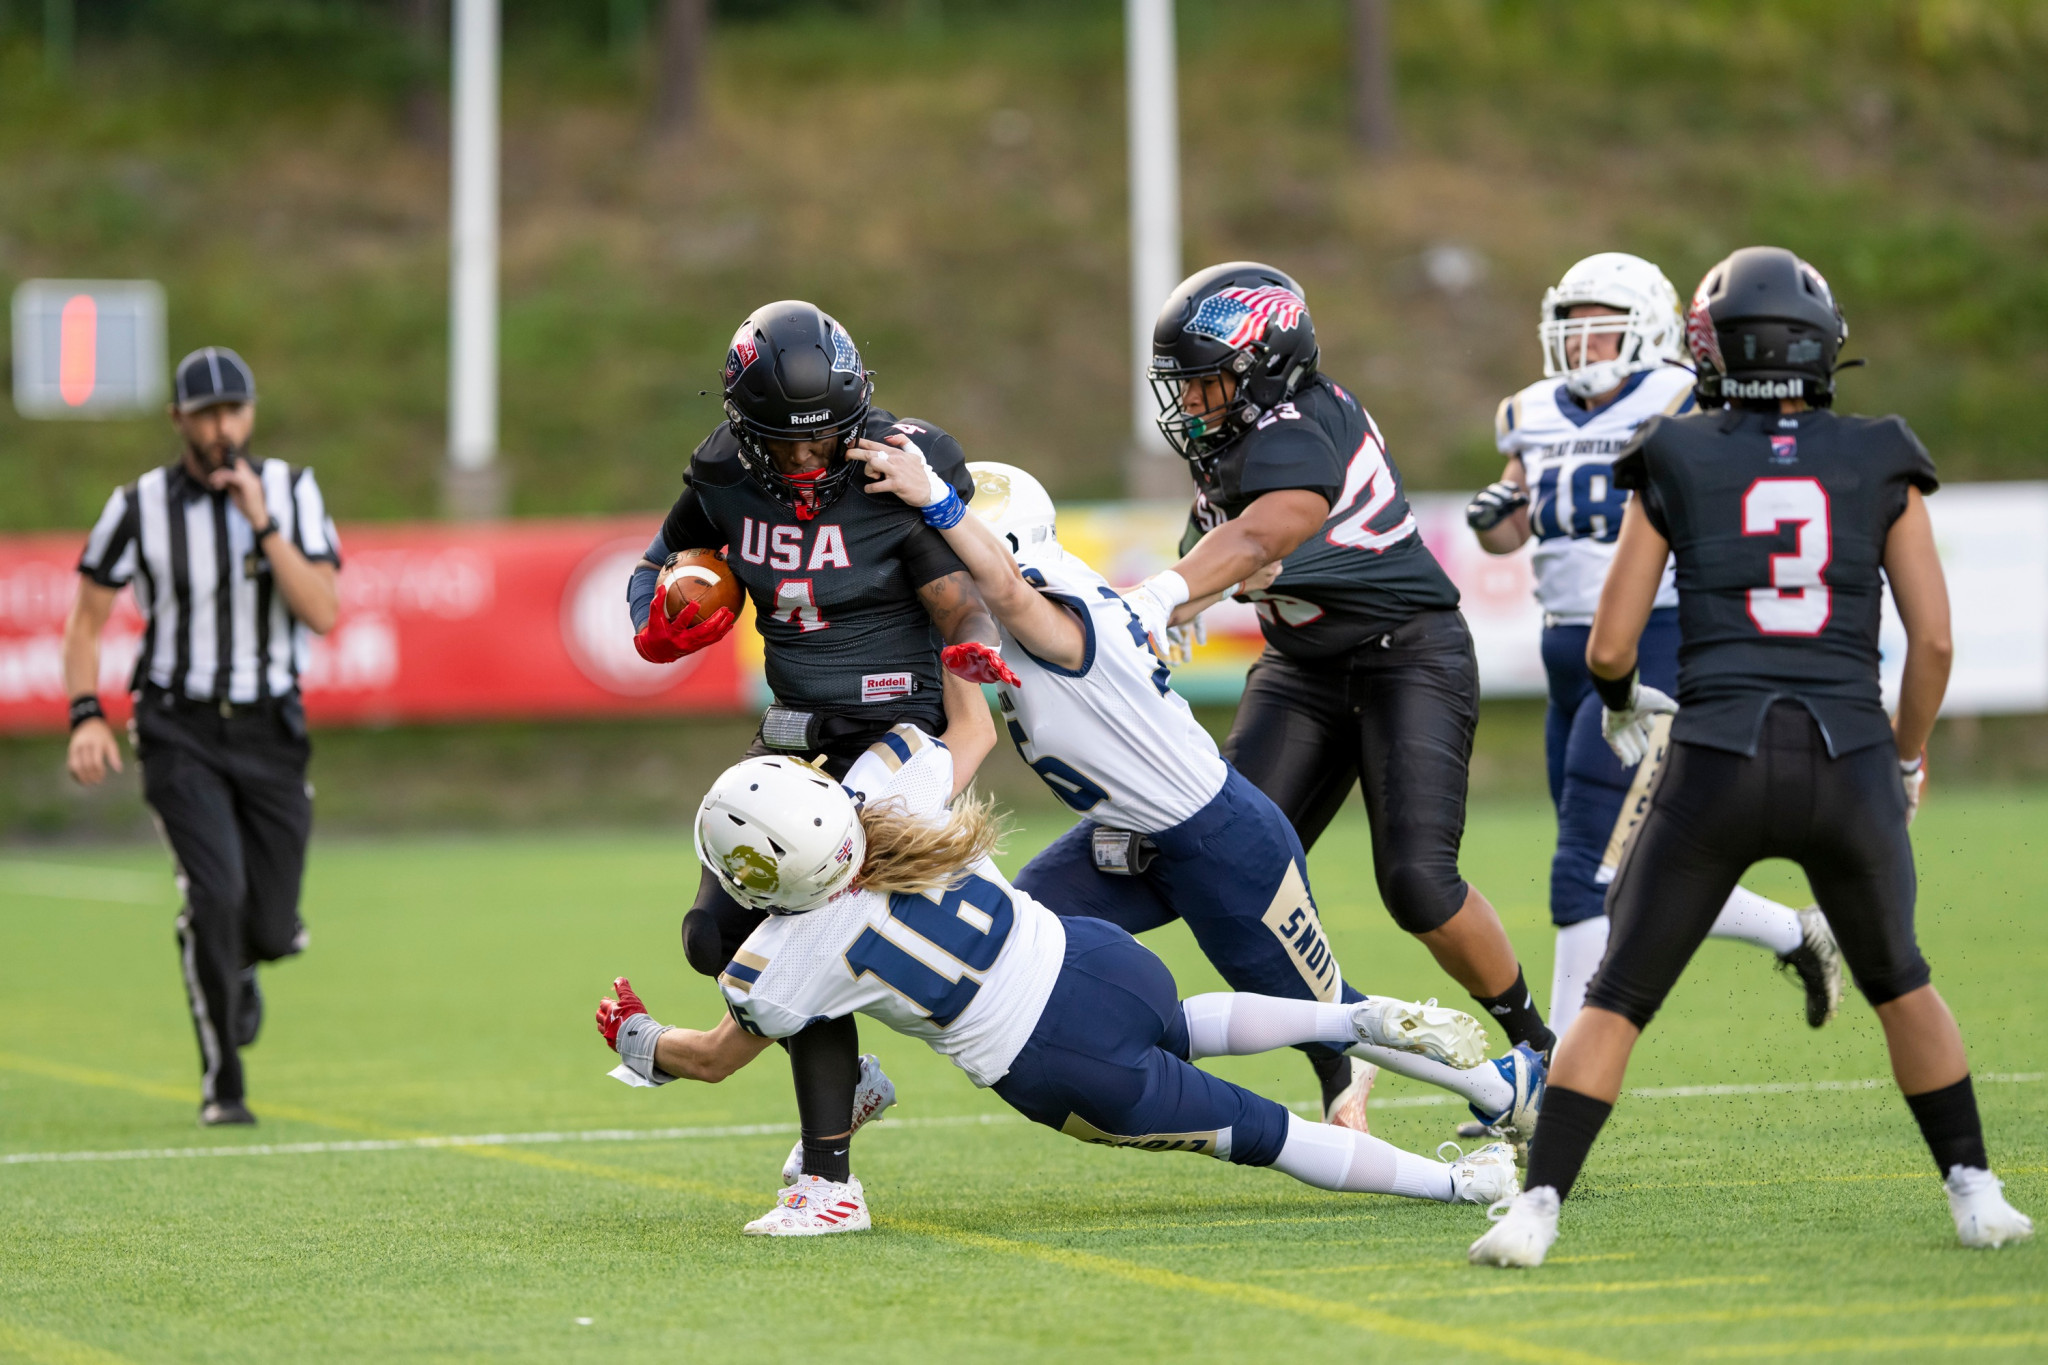 The appearance of women's flag football at the 2022 World Games was one of the highlights of the year for the IFAF ©IFAF